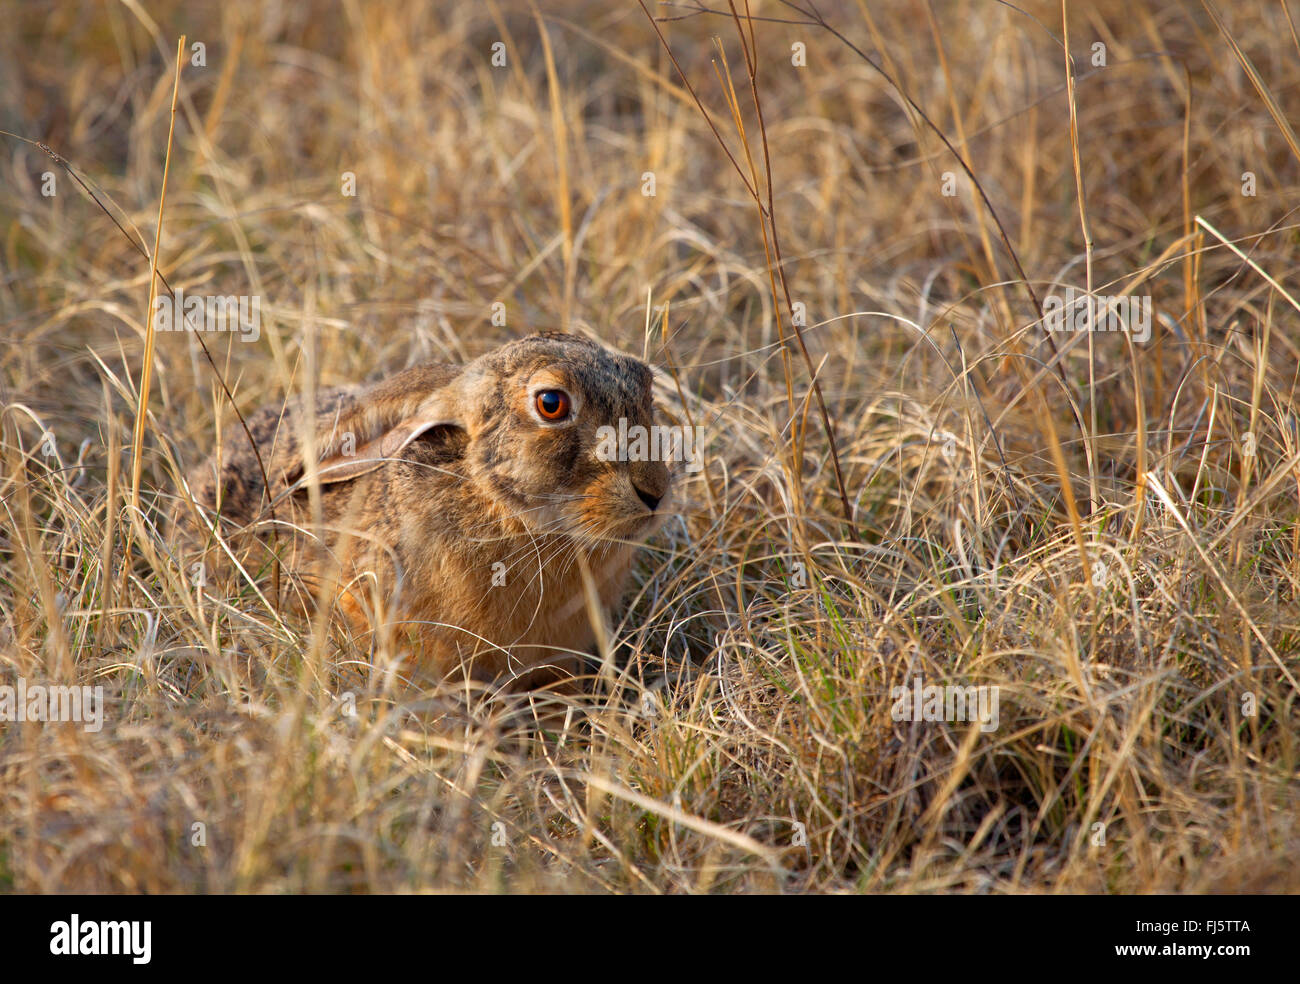 Cape hare, brown hare (Lepus capensis), well camouflaged in dry grass, South Africa Stock Photo